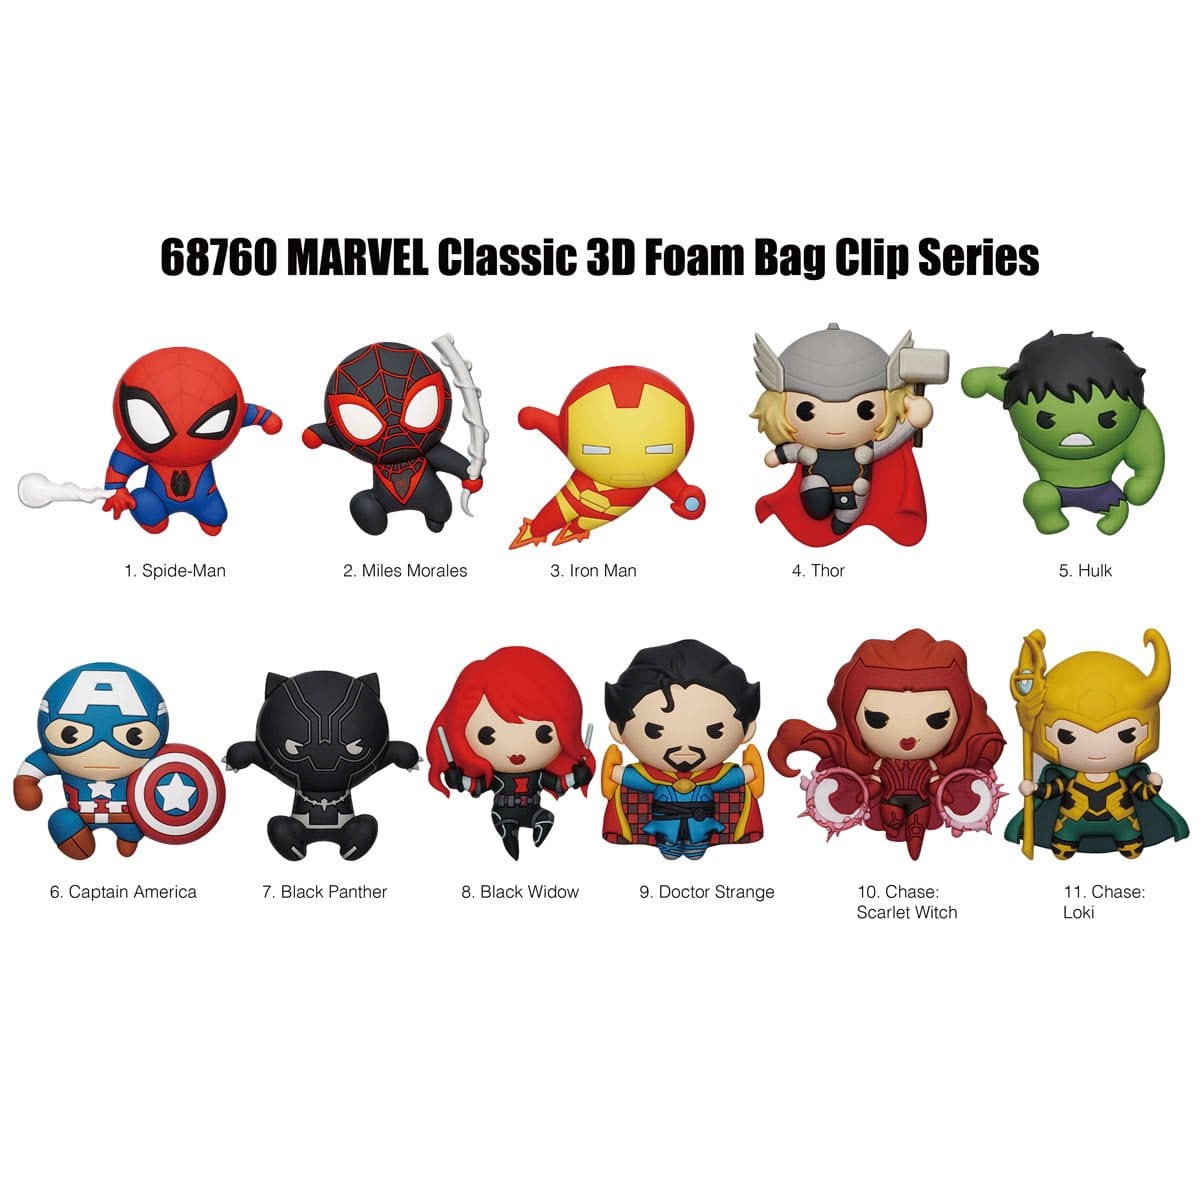 Monogram Keychain Marvel The Avengers Collectible 3D Figure Bag Clip MG68760